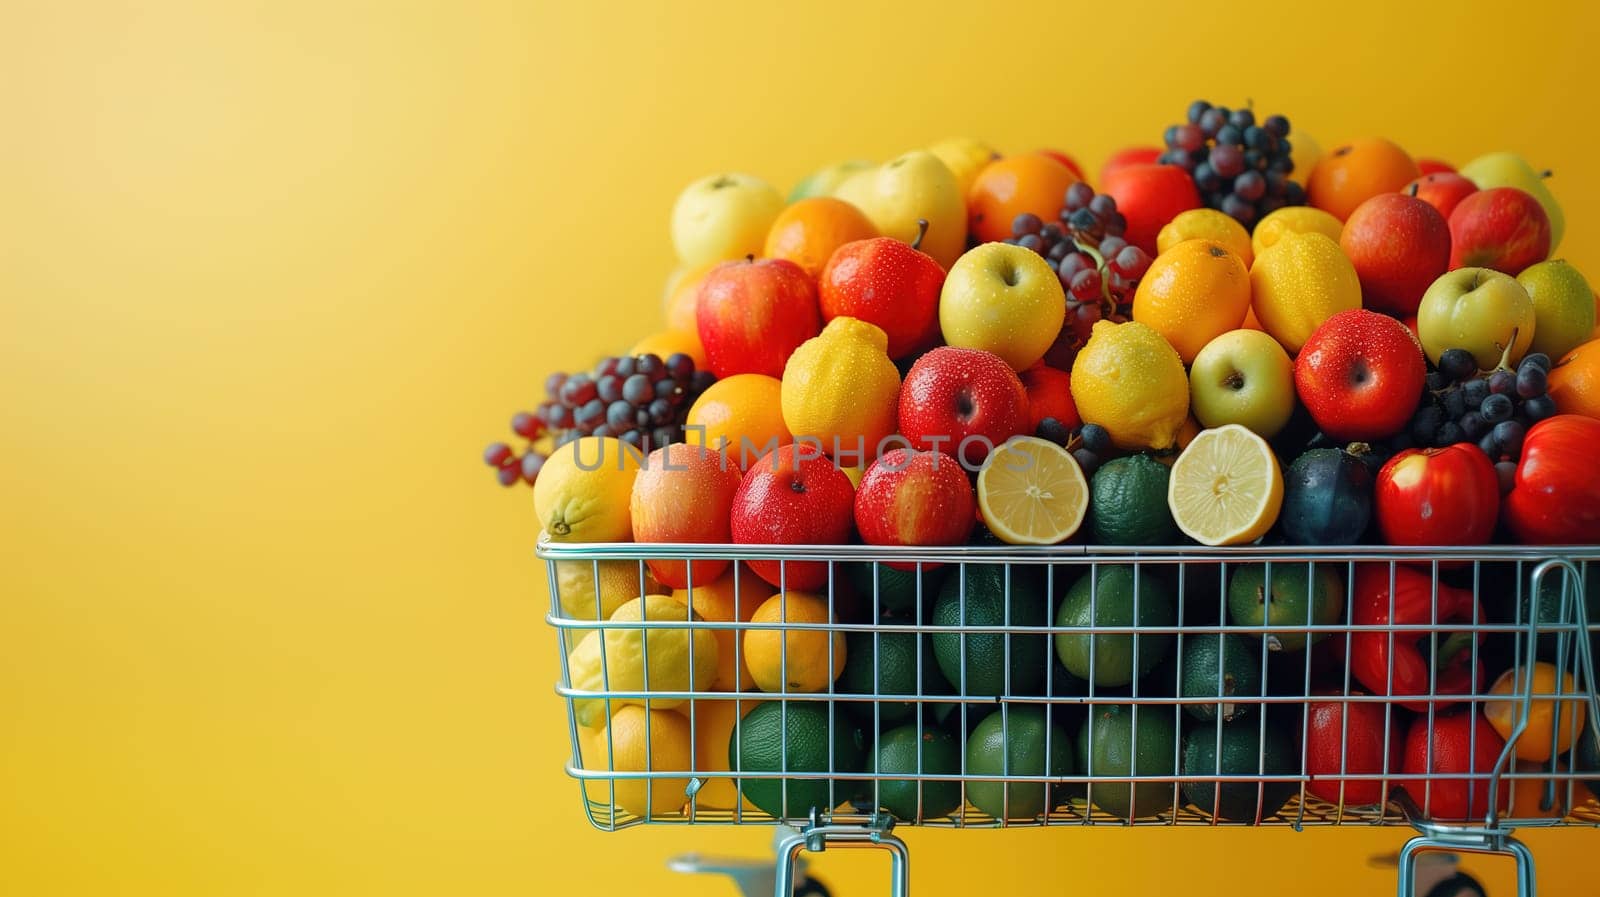 A Shopping Cart Overflowing With a Variety of Fresh Fruits by TRMK